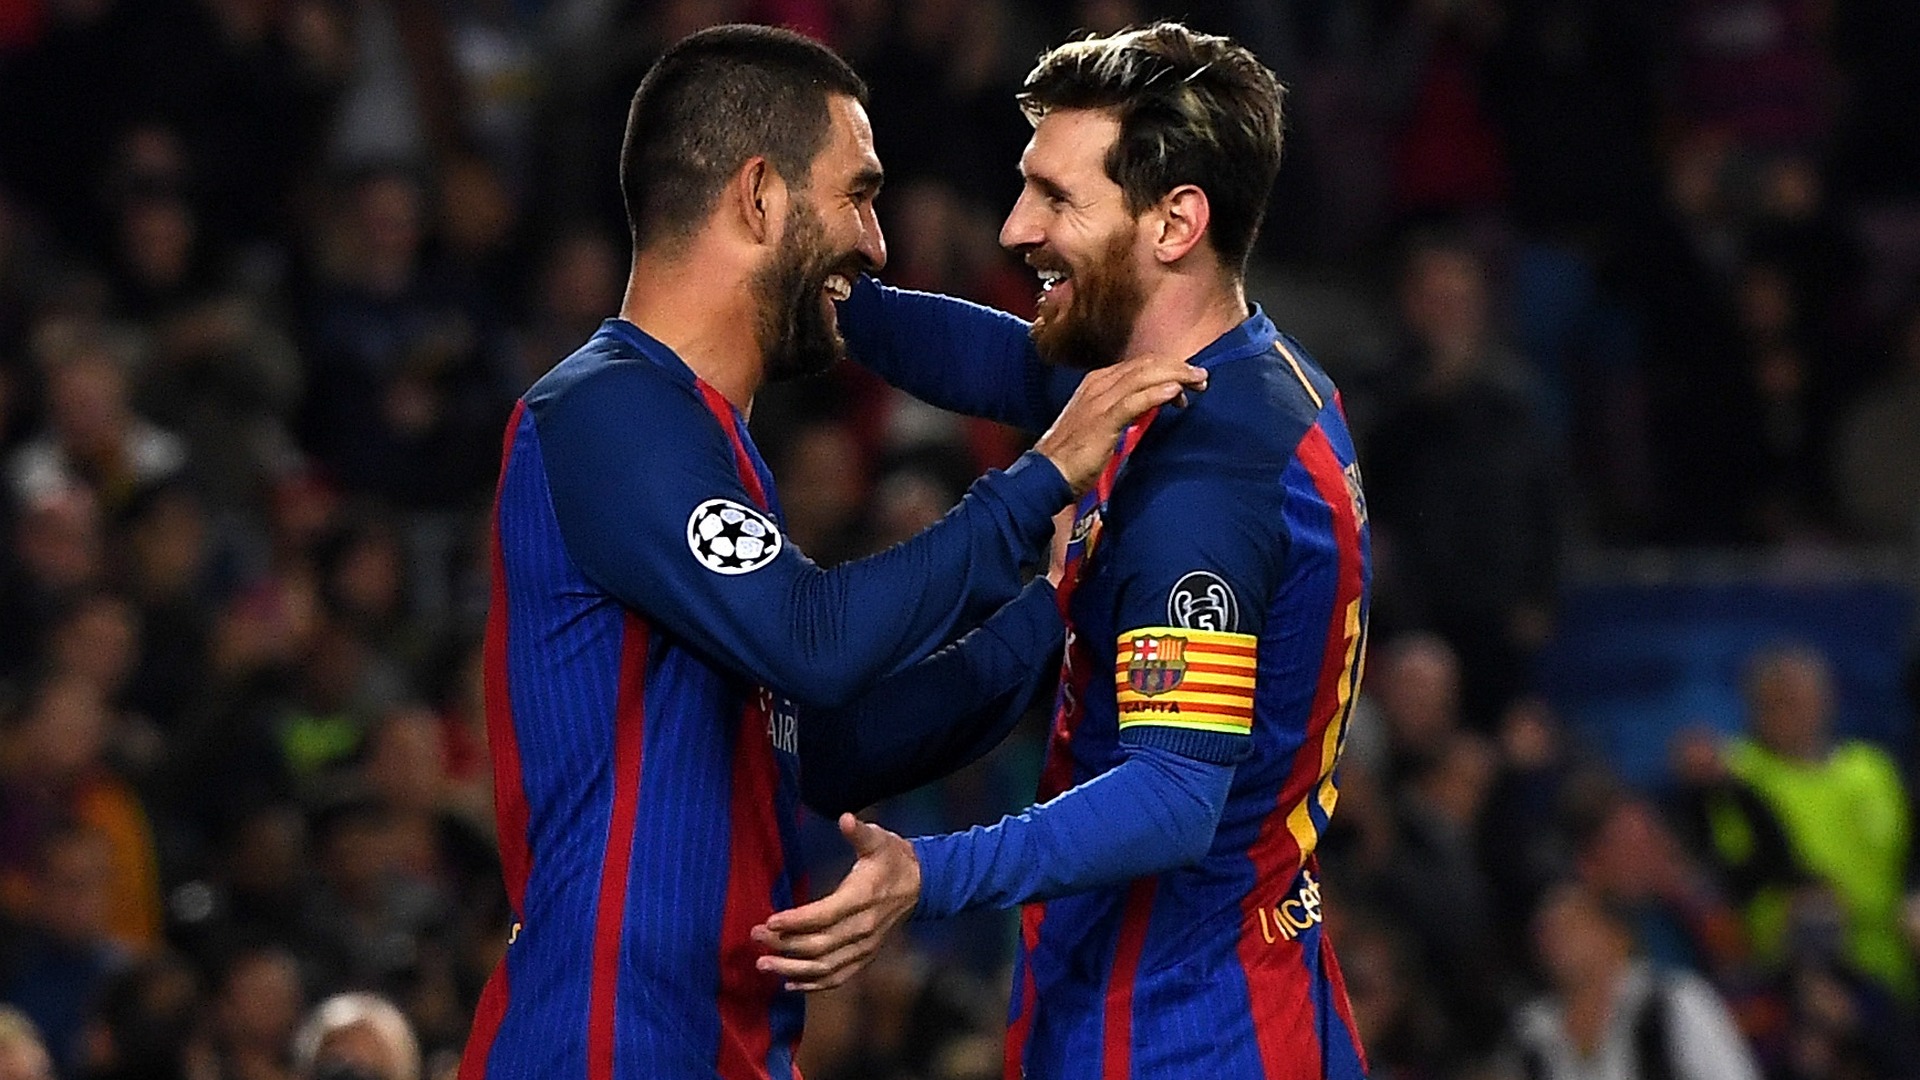 'Barcelona boss Valverde made me feel insignificant' - Arda Turan